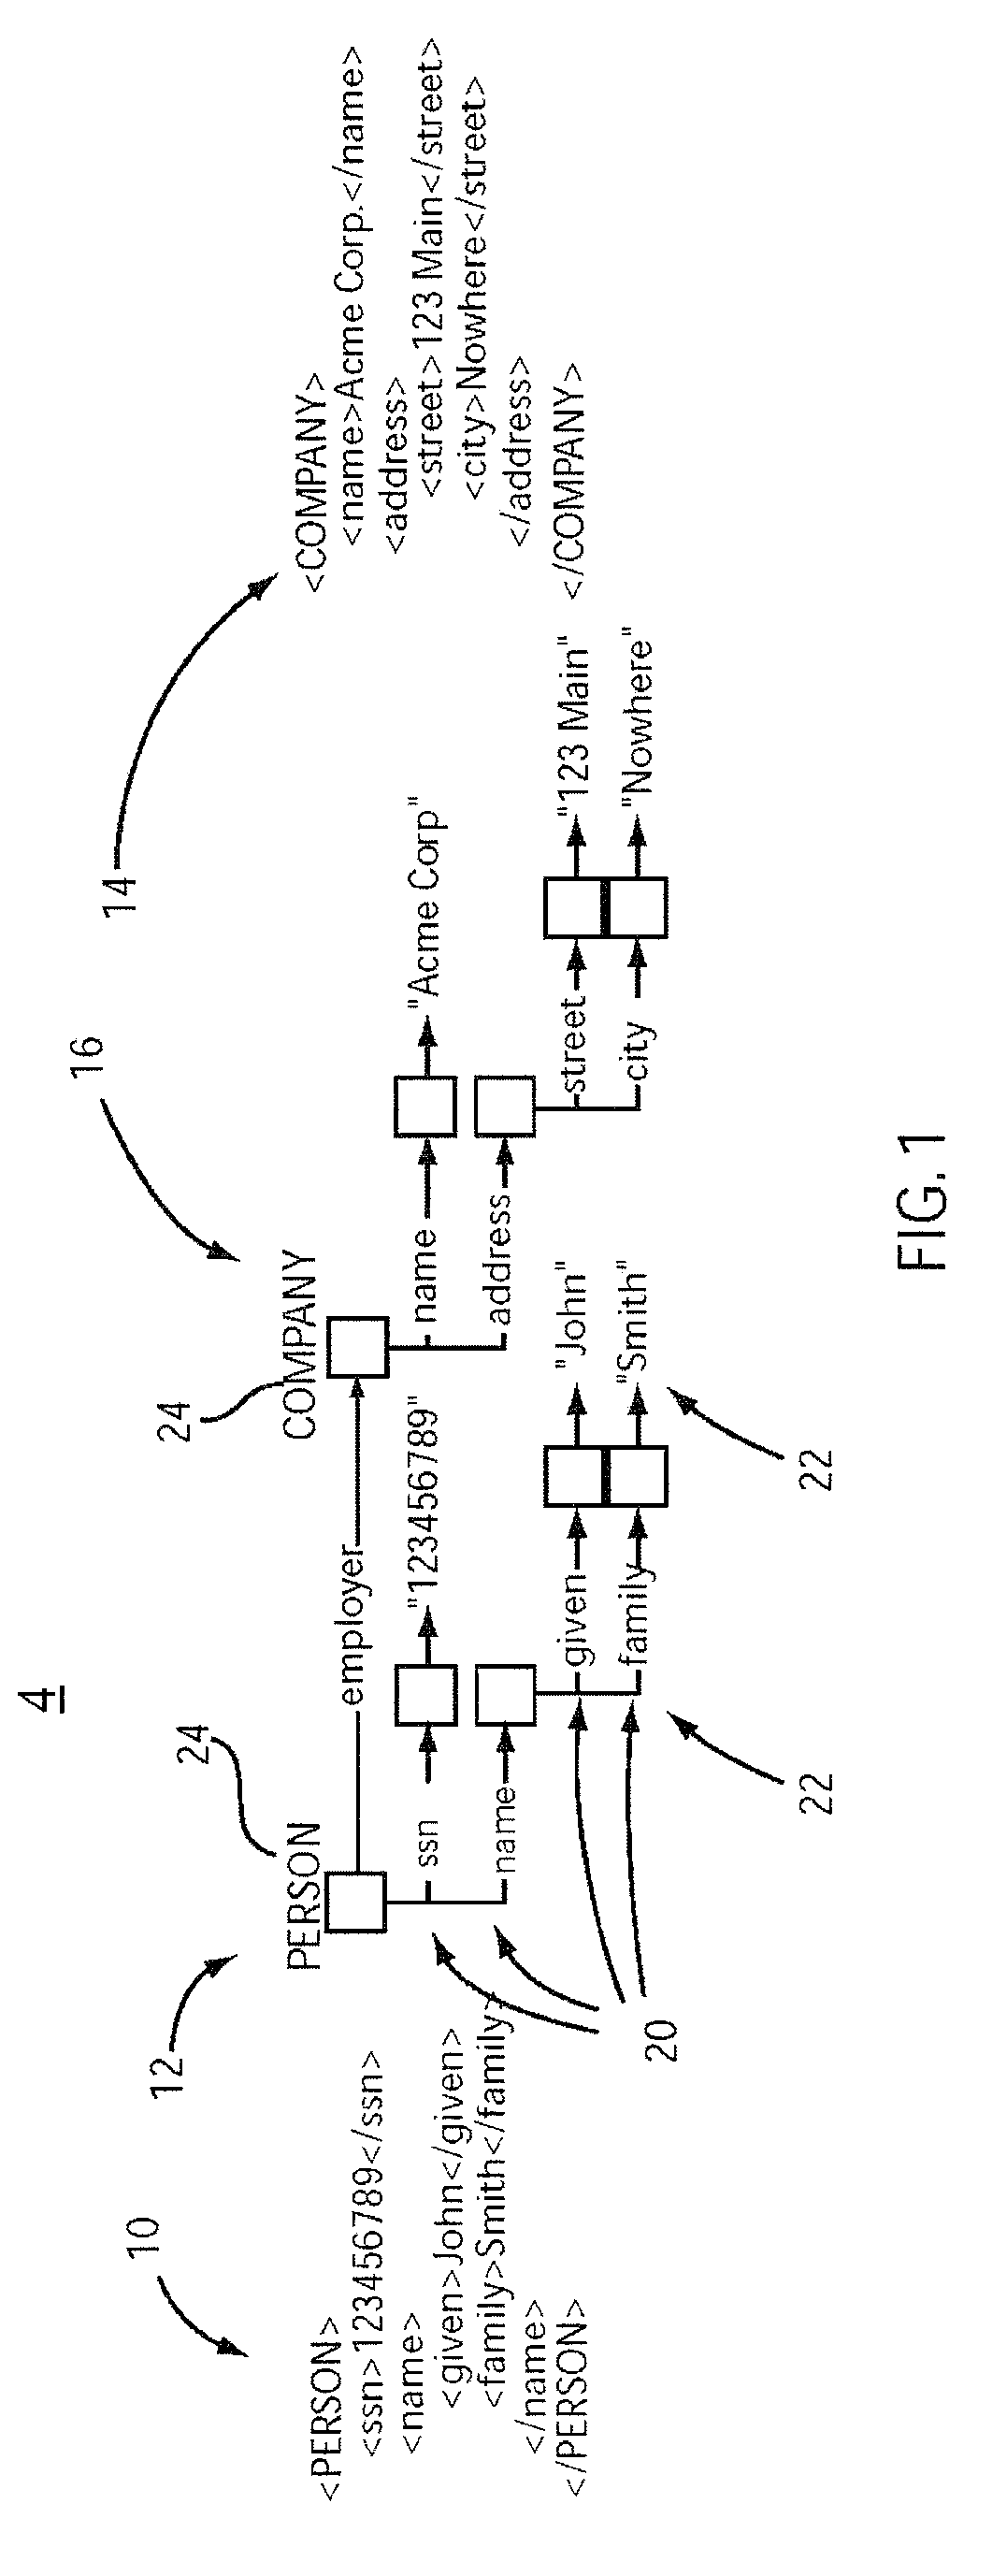 System and method for managing resources using a compositional programming model